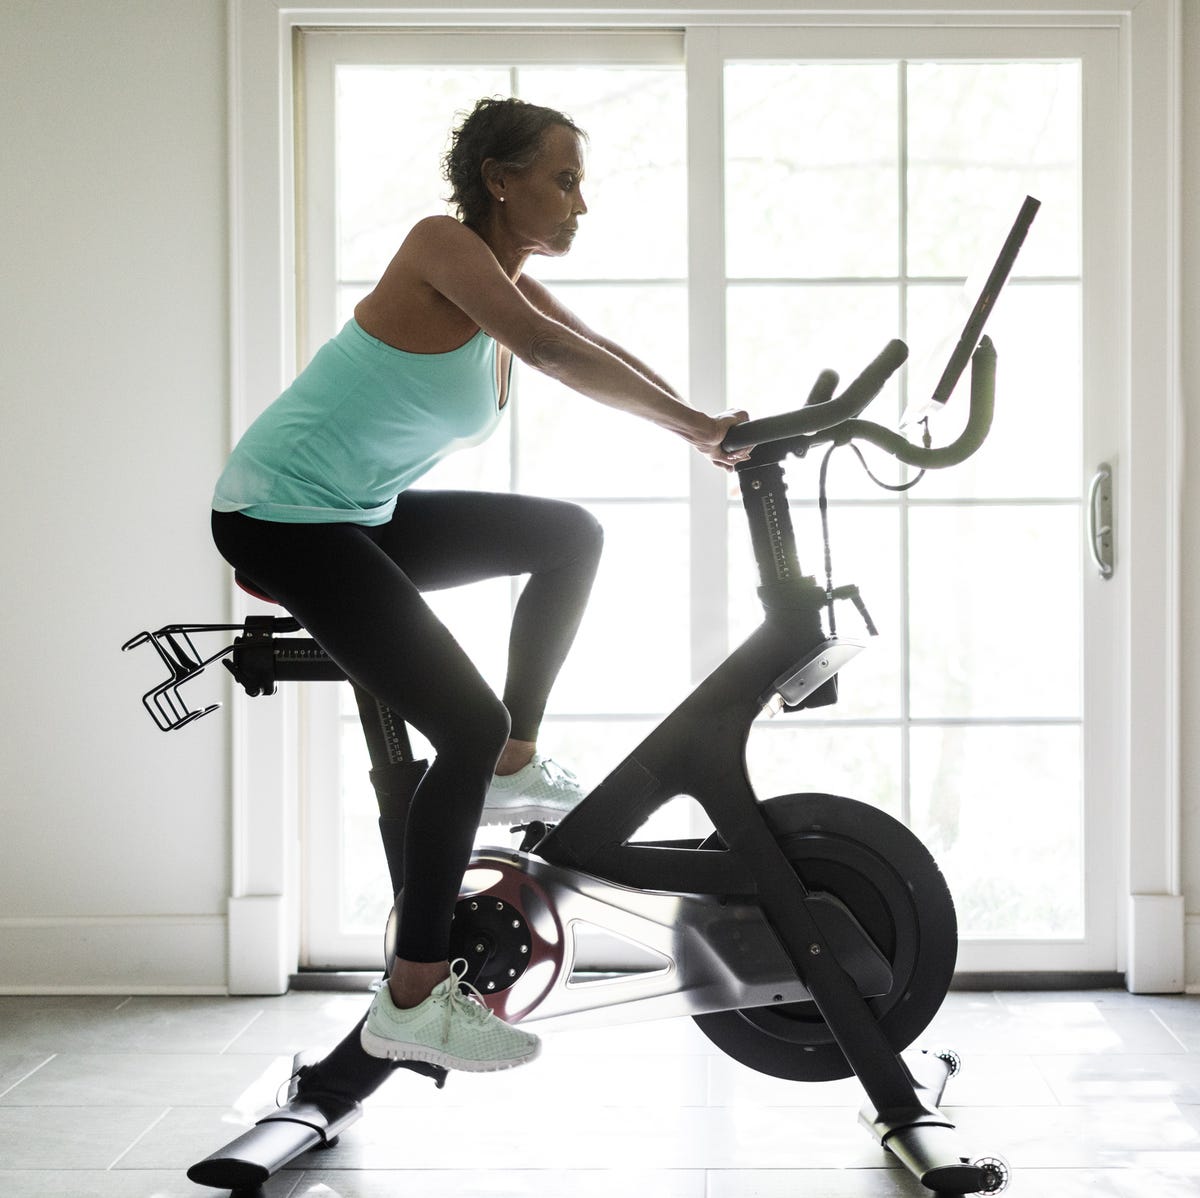 10. Include Stationary Bike Workout in Fitness Routine for Health Benefits